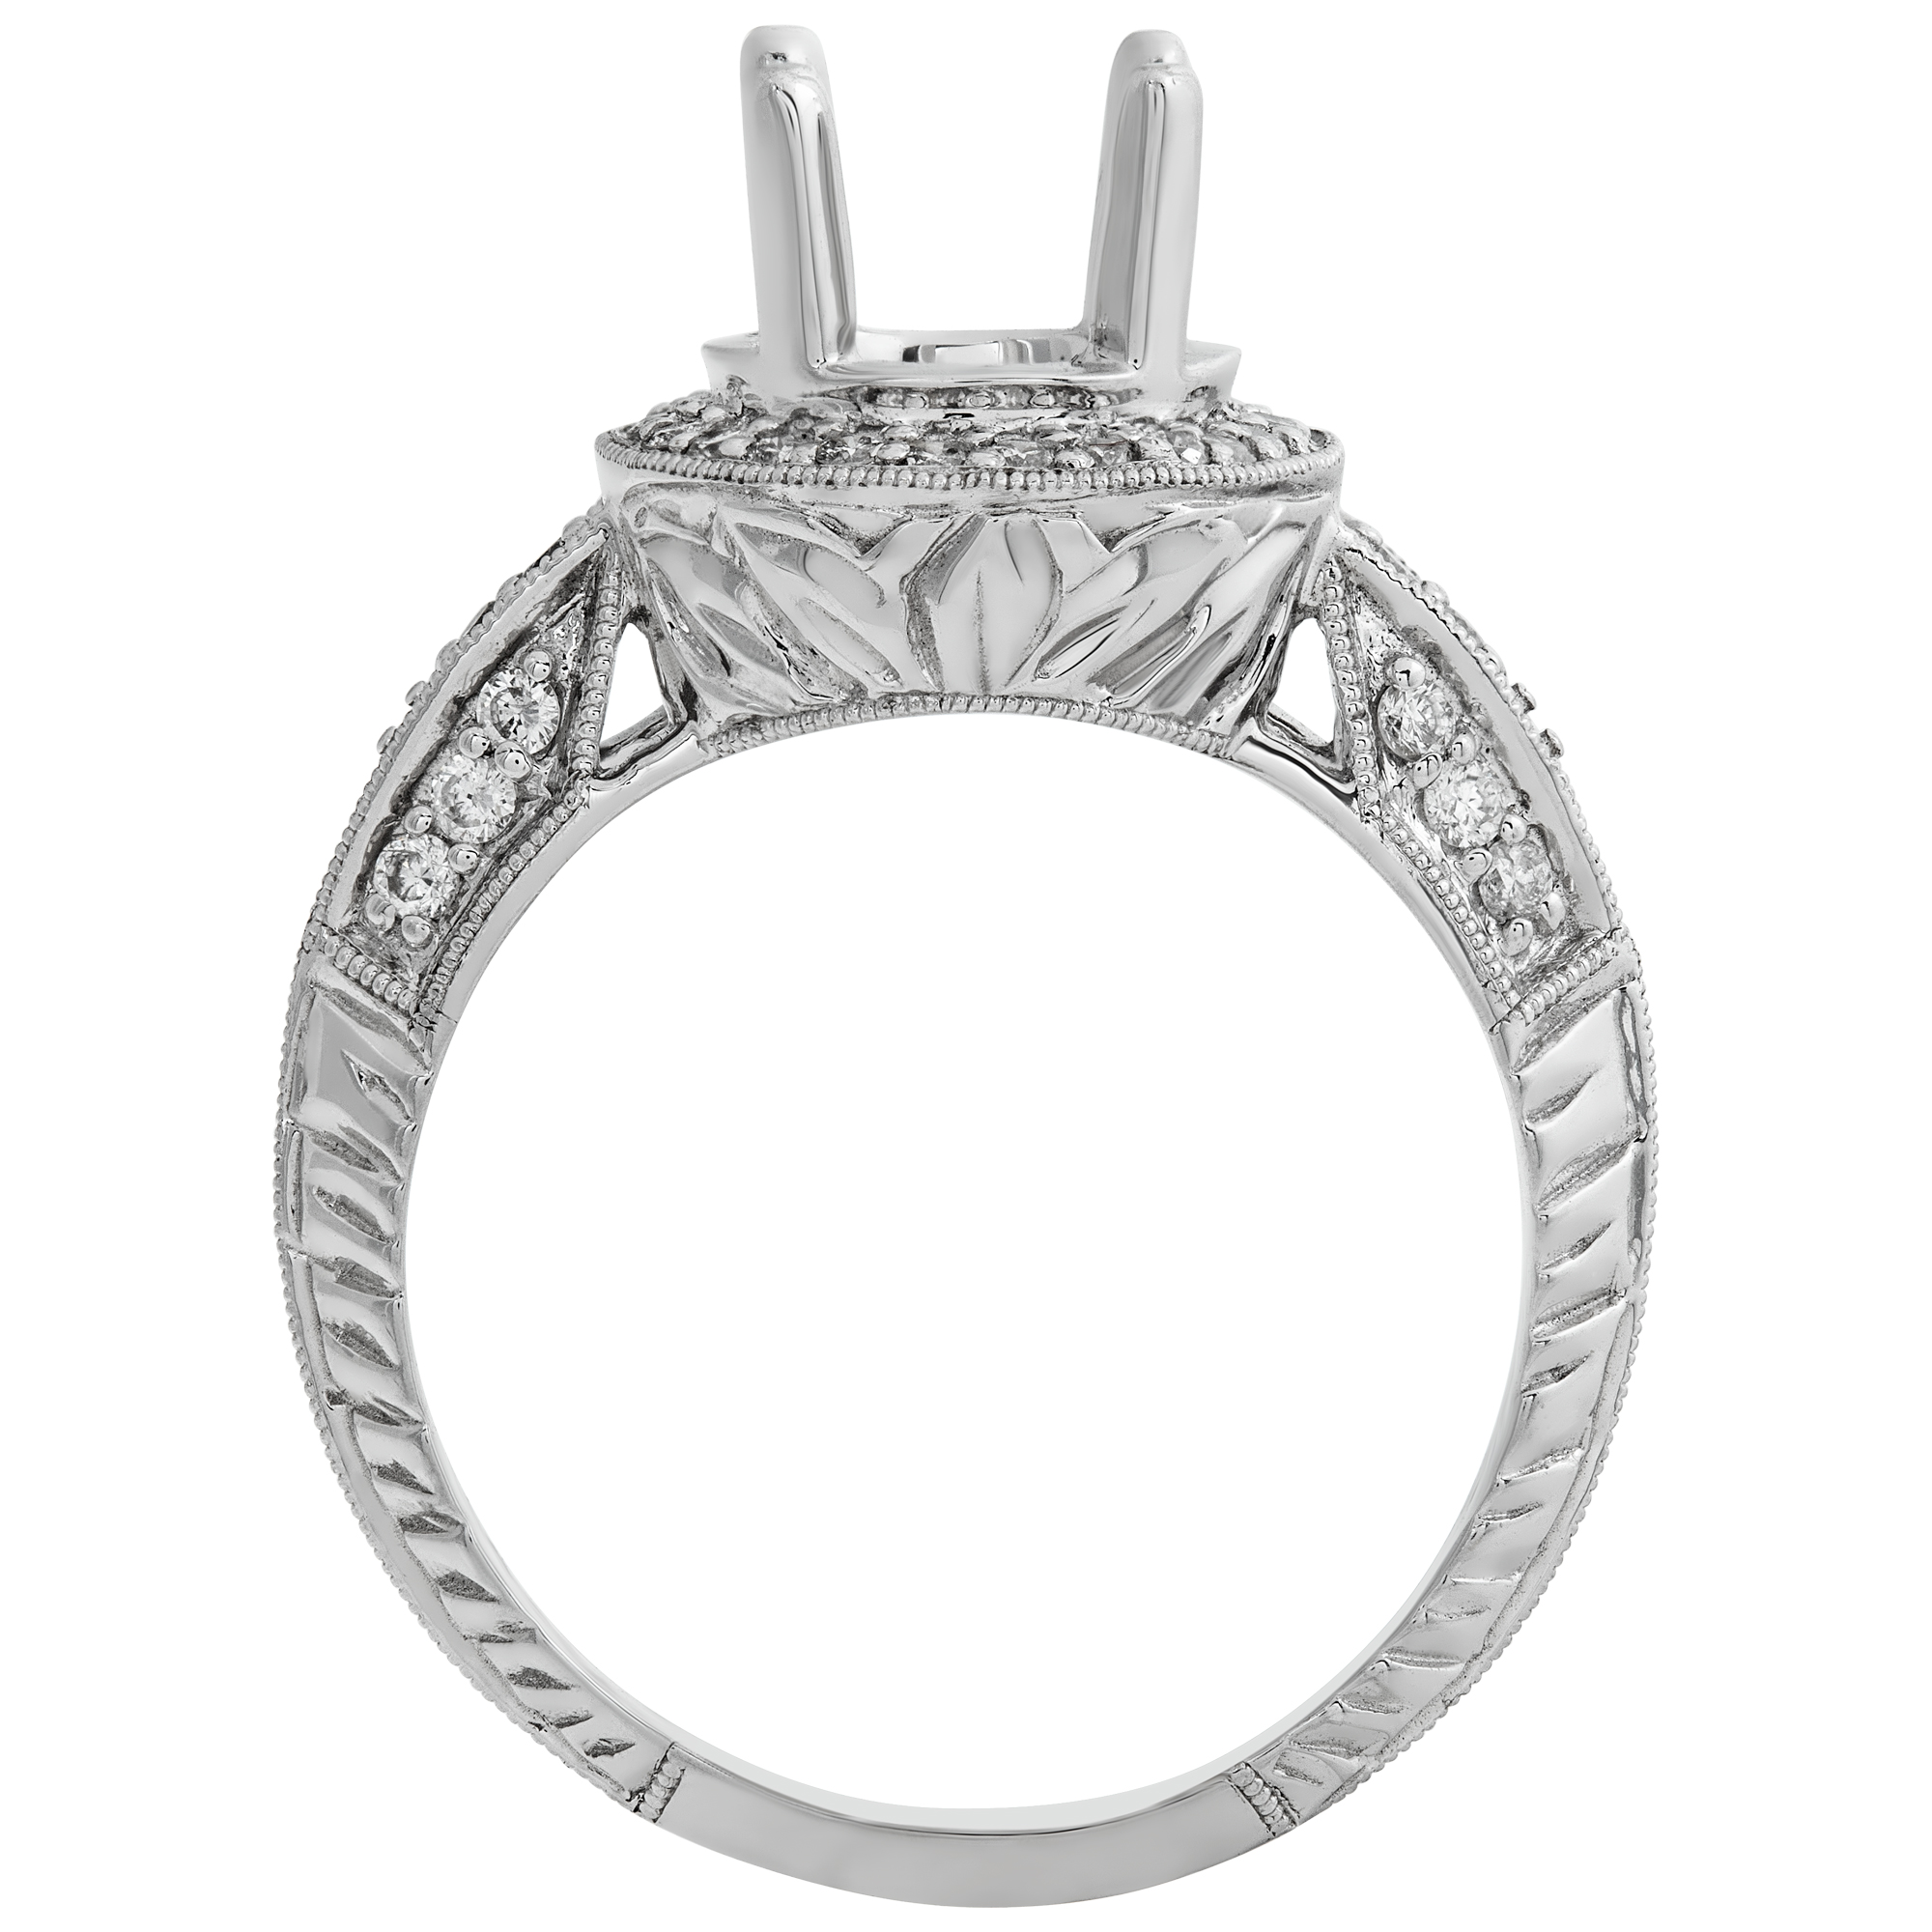 18k white gold round diamond pave setting; 1.09 cts in diamonds (H,SI1) image 4